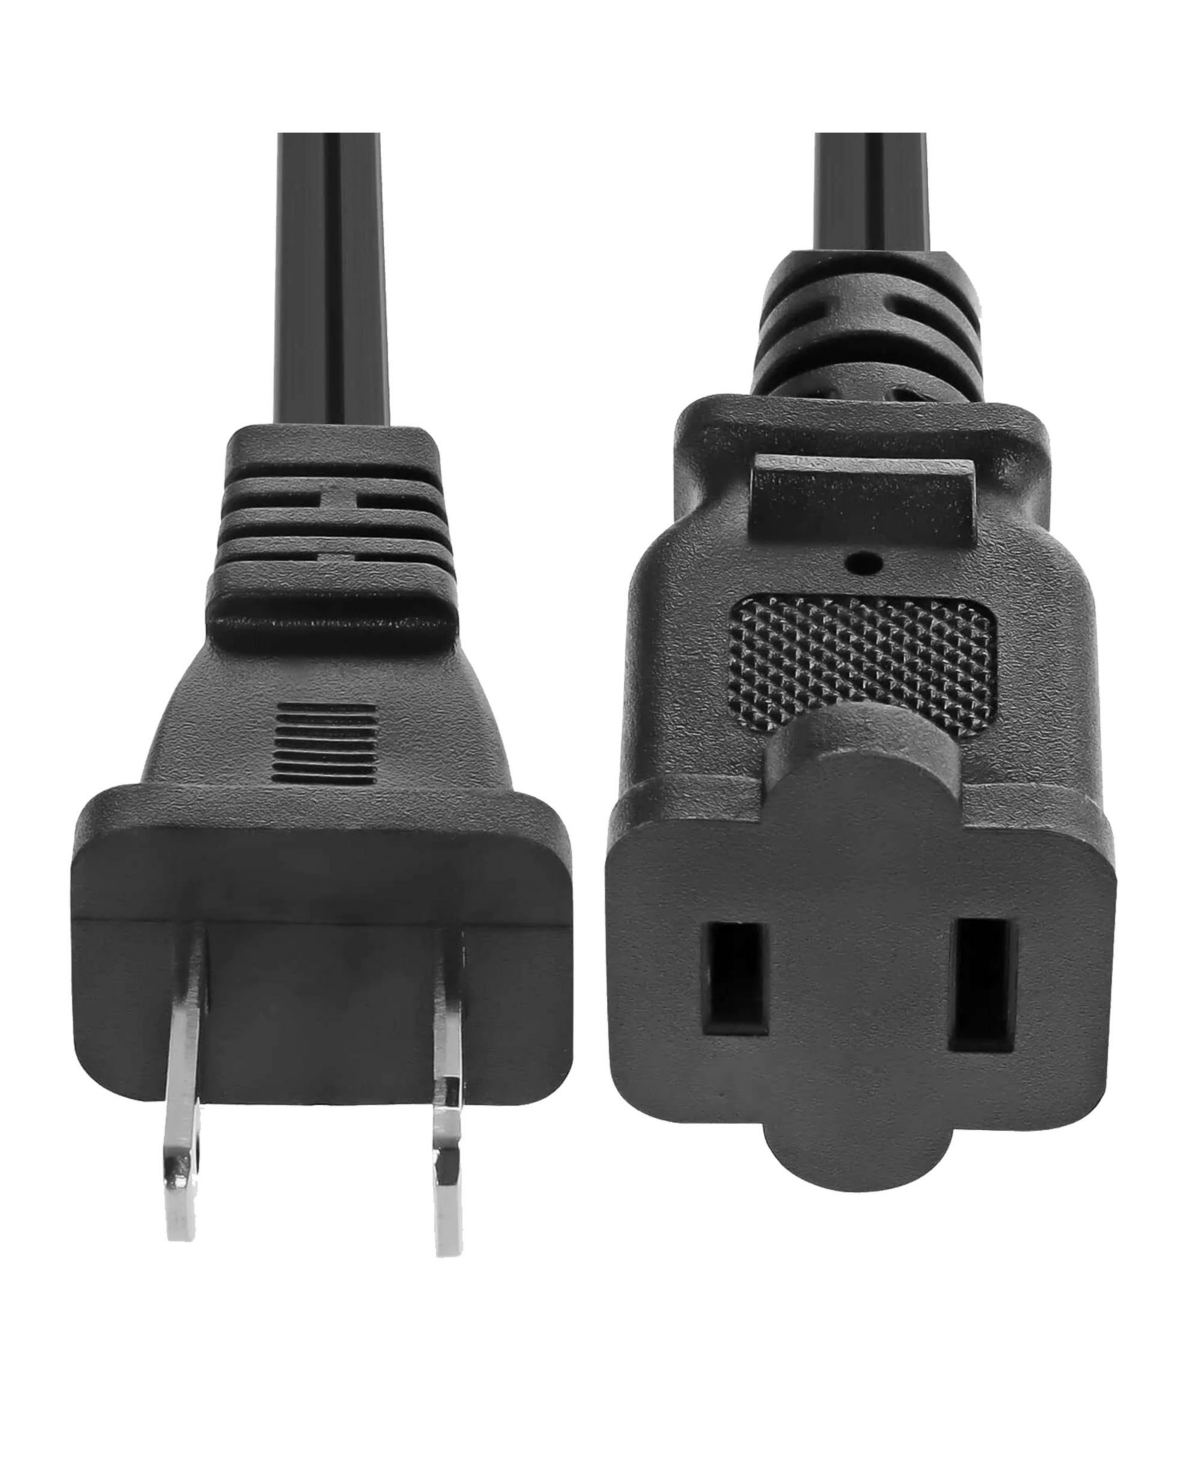 Ac Power Cord 10 Ft • Us Polarized Male to Female 2 Prong Extension Adapter 16AWG/2C 125V 13A -Exc Blk 10FT - Black